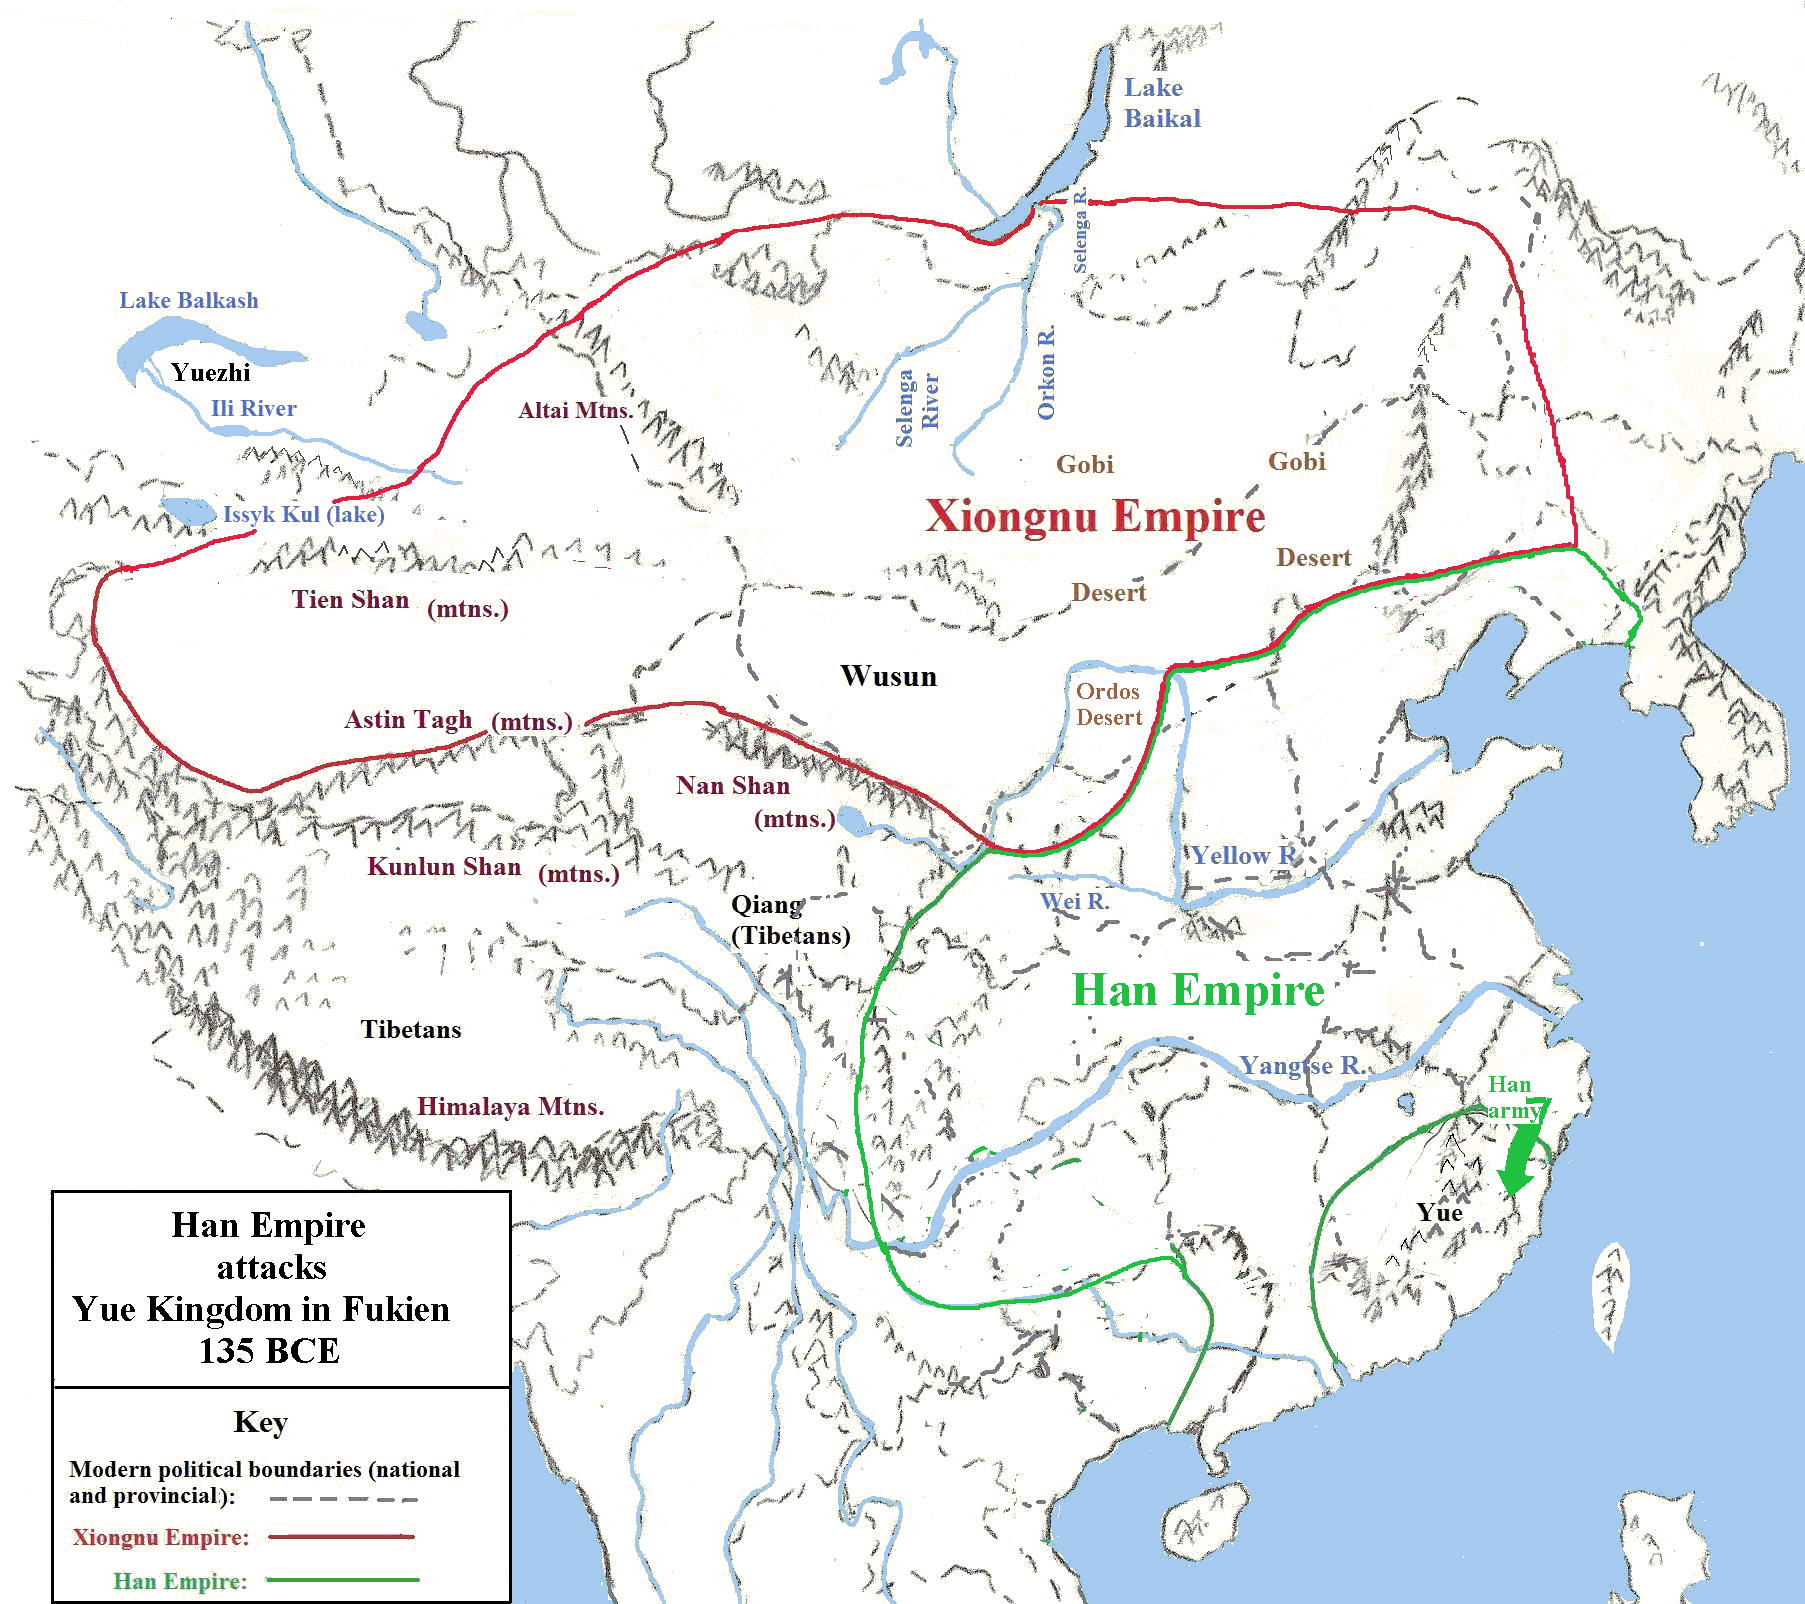 Map showing Han attack against Yue in Fukien in 135 BCE